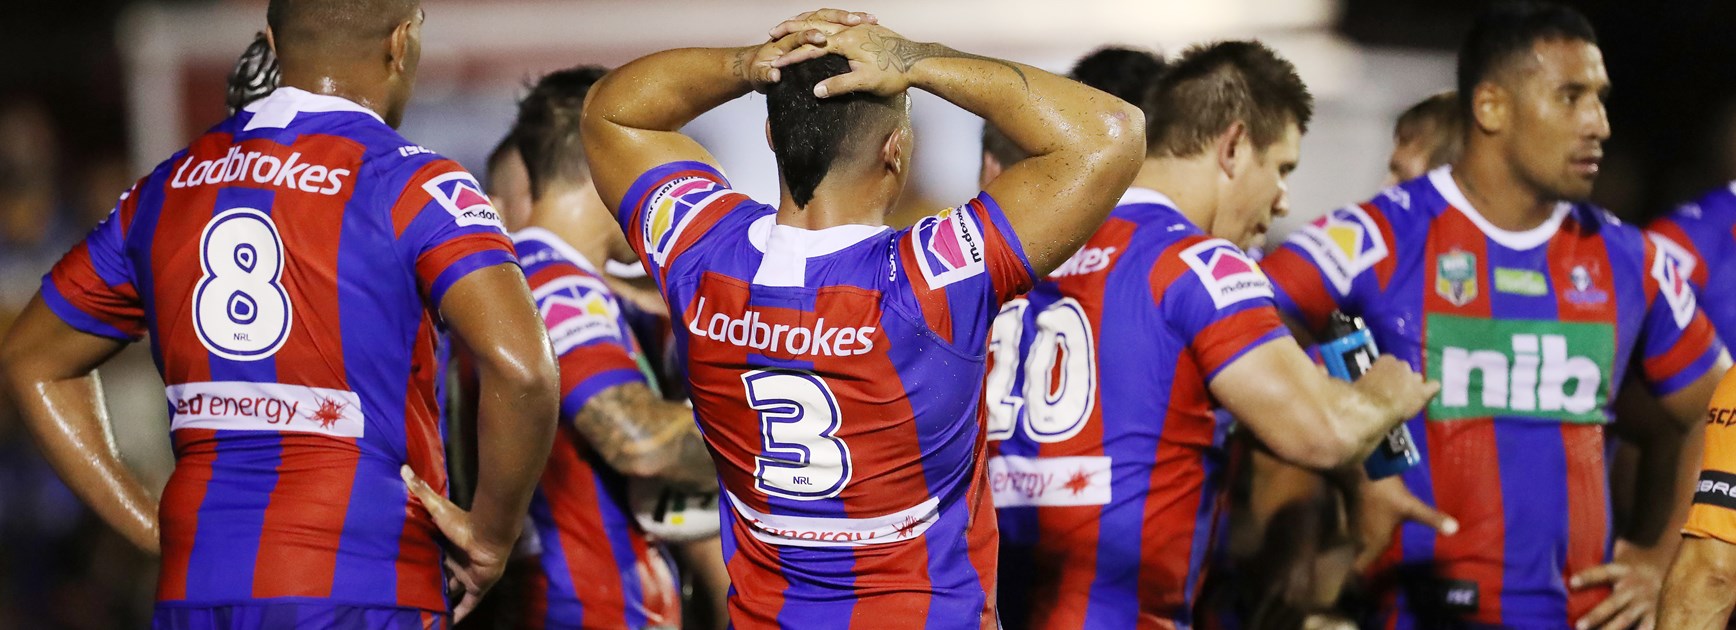 The Newcastle Knights.